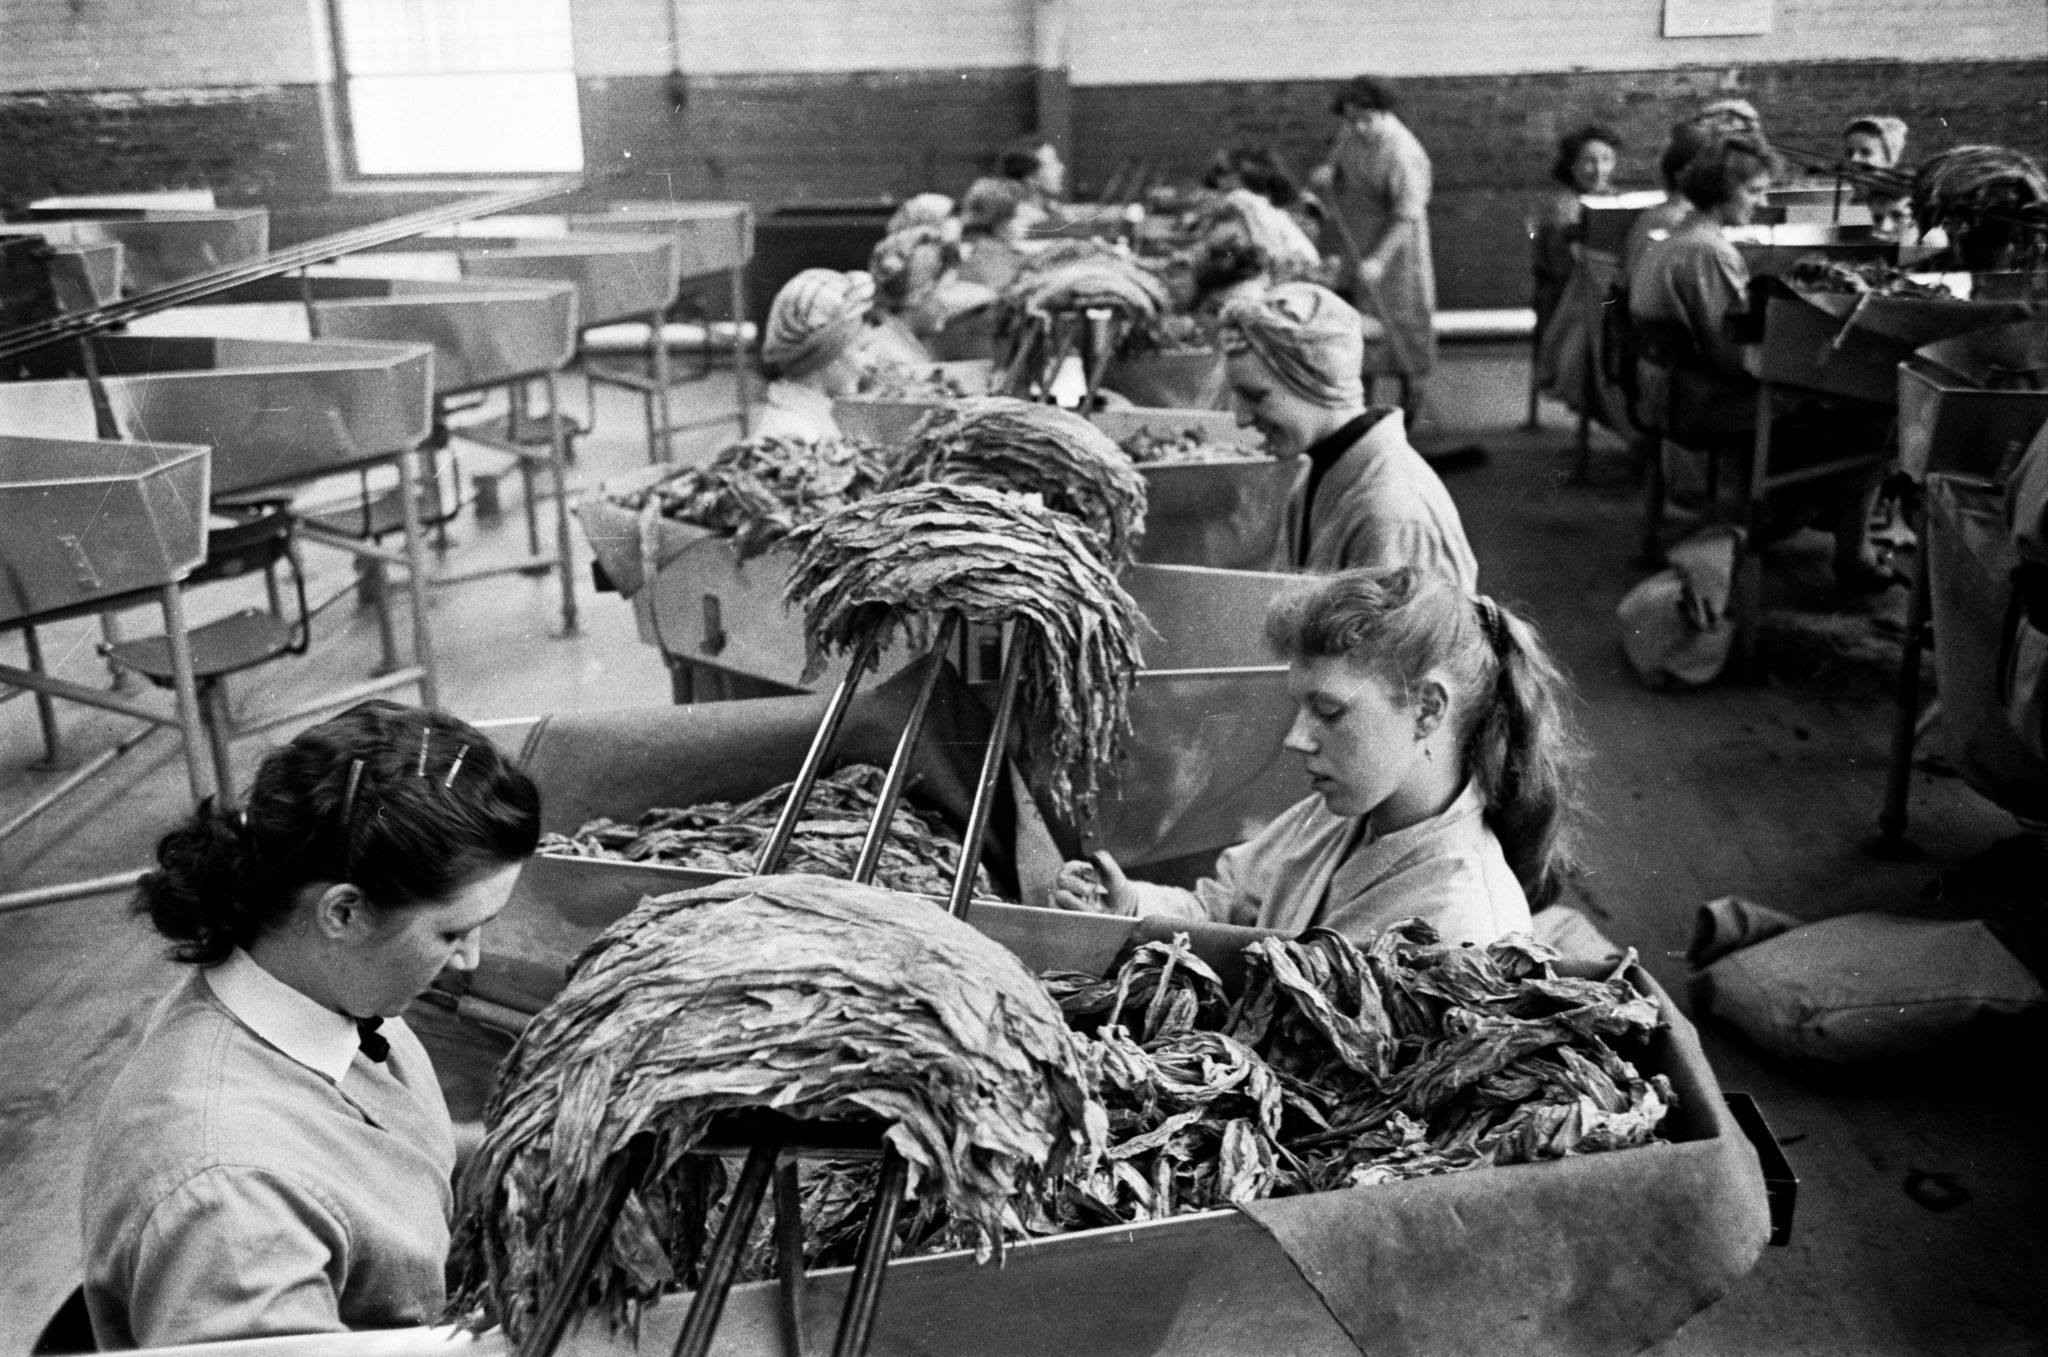 20th August 1955: Workers sorting out piles of golden leaf tobacco at the Three Nuns tobacco factory in Glasgow. The tobacco industry in Glasgow dates back to the eighteenth century but it collapsed in the 1770s when the American War of Independence ruined the city's 'Tobacco Lords'. It was gradually rebuilt and local firm Stephen Mitchell & Son still operates from Alexander Parade which is the oldest foundation of the tobacco trade, dating back to 1723. Original Publication: Picture Post - 7942 - Let Glasgow Flourish! - pub. 1955 (Photo by Haywood Magee/Picture Post/Hulton Archive/Getty Images)